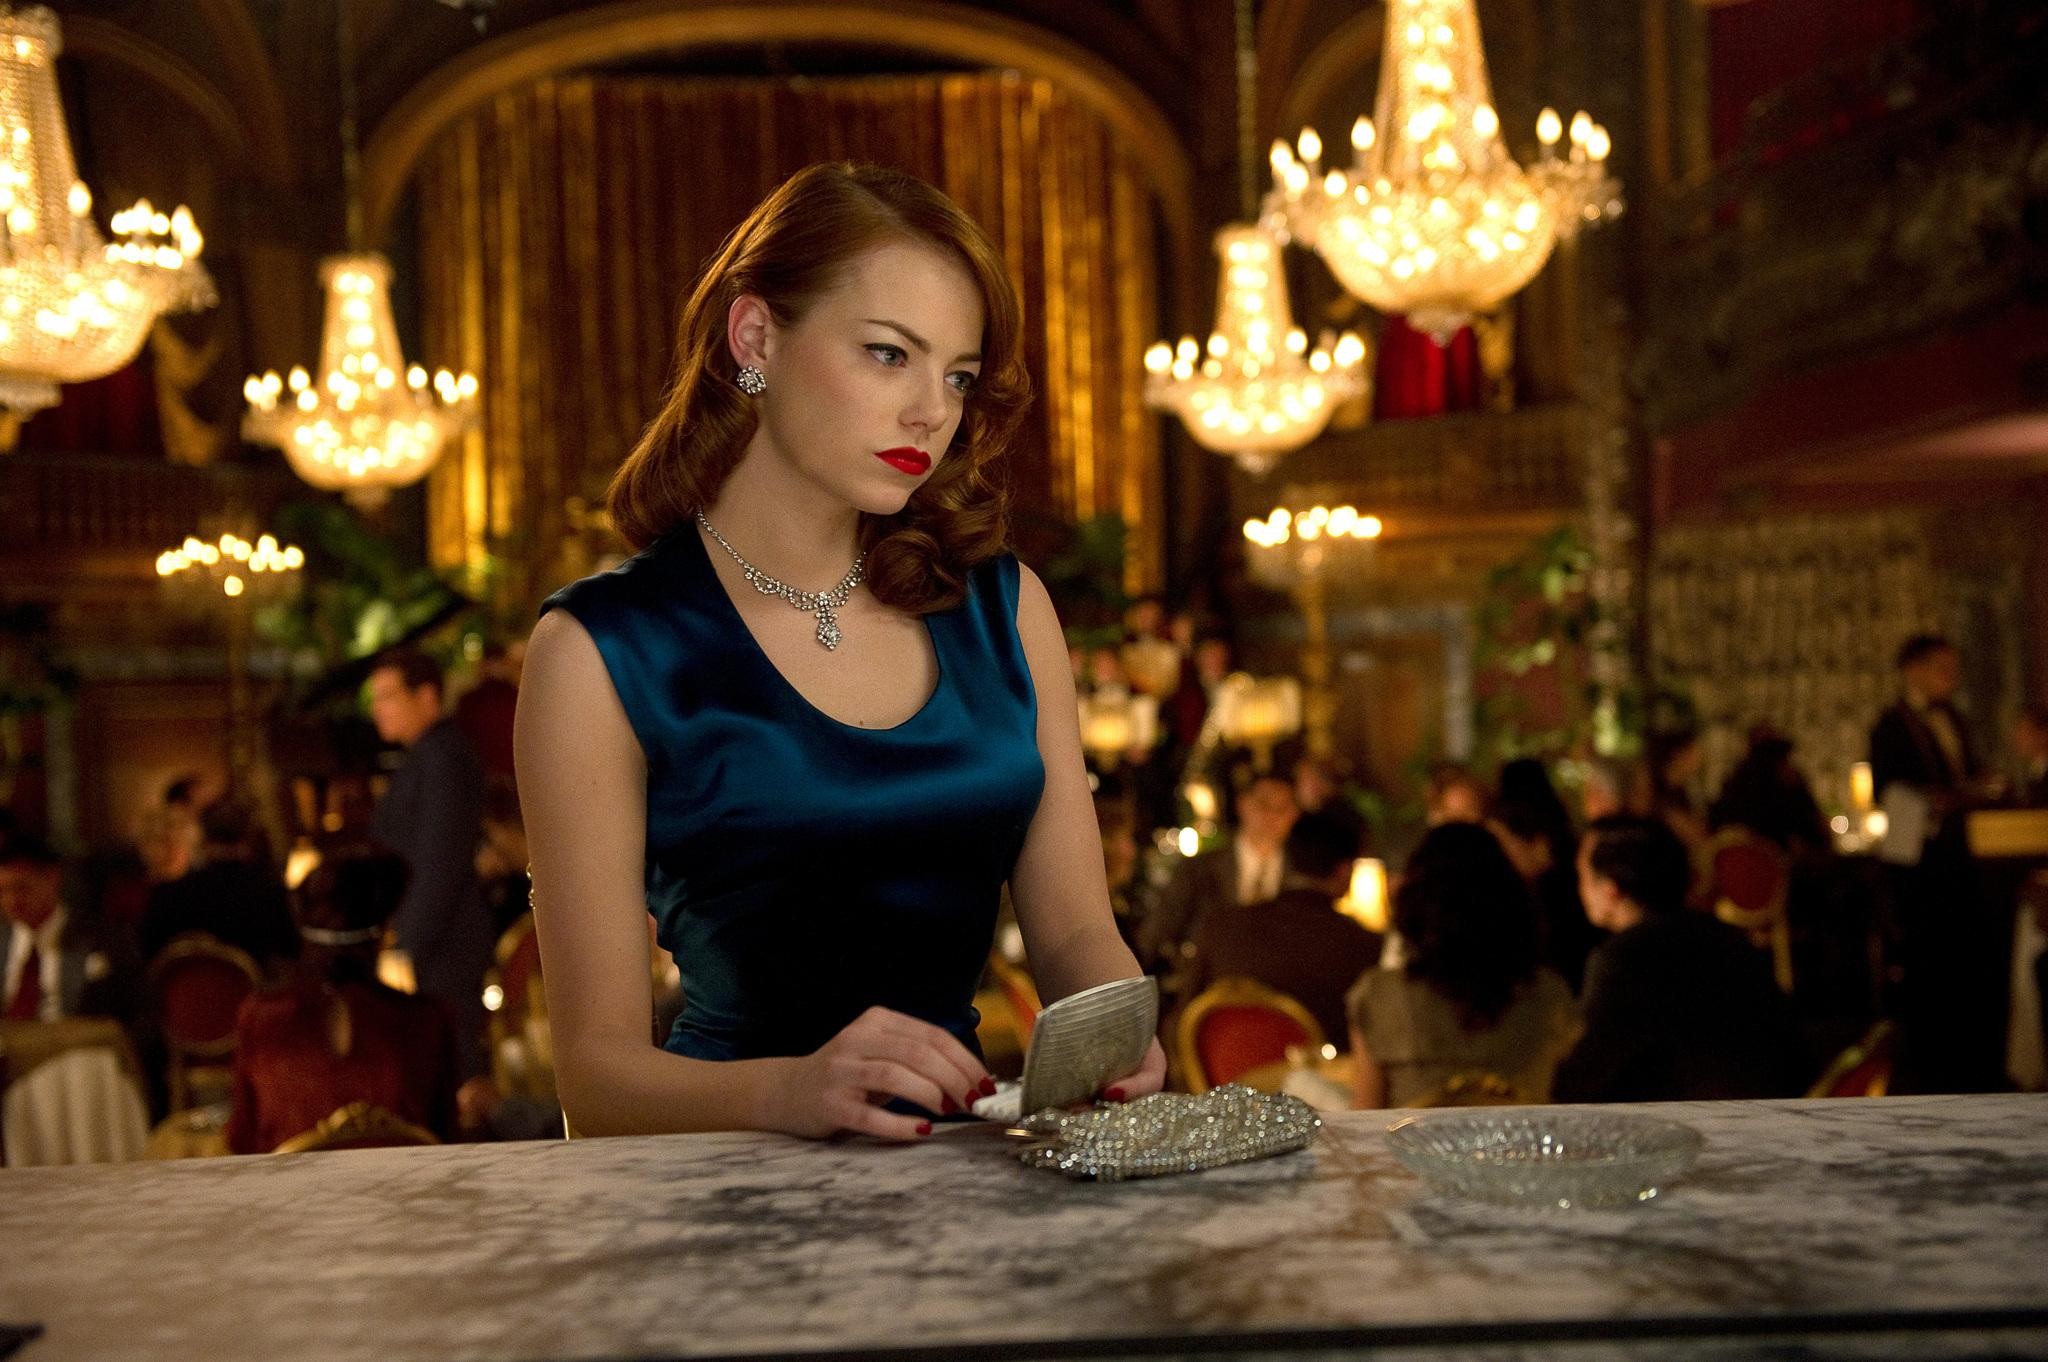 Women Gangster Squad Actress Necklace Movies Emma Stone Redhead Classy Movie Scenes Dress Blue Dress 2048x1362